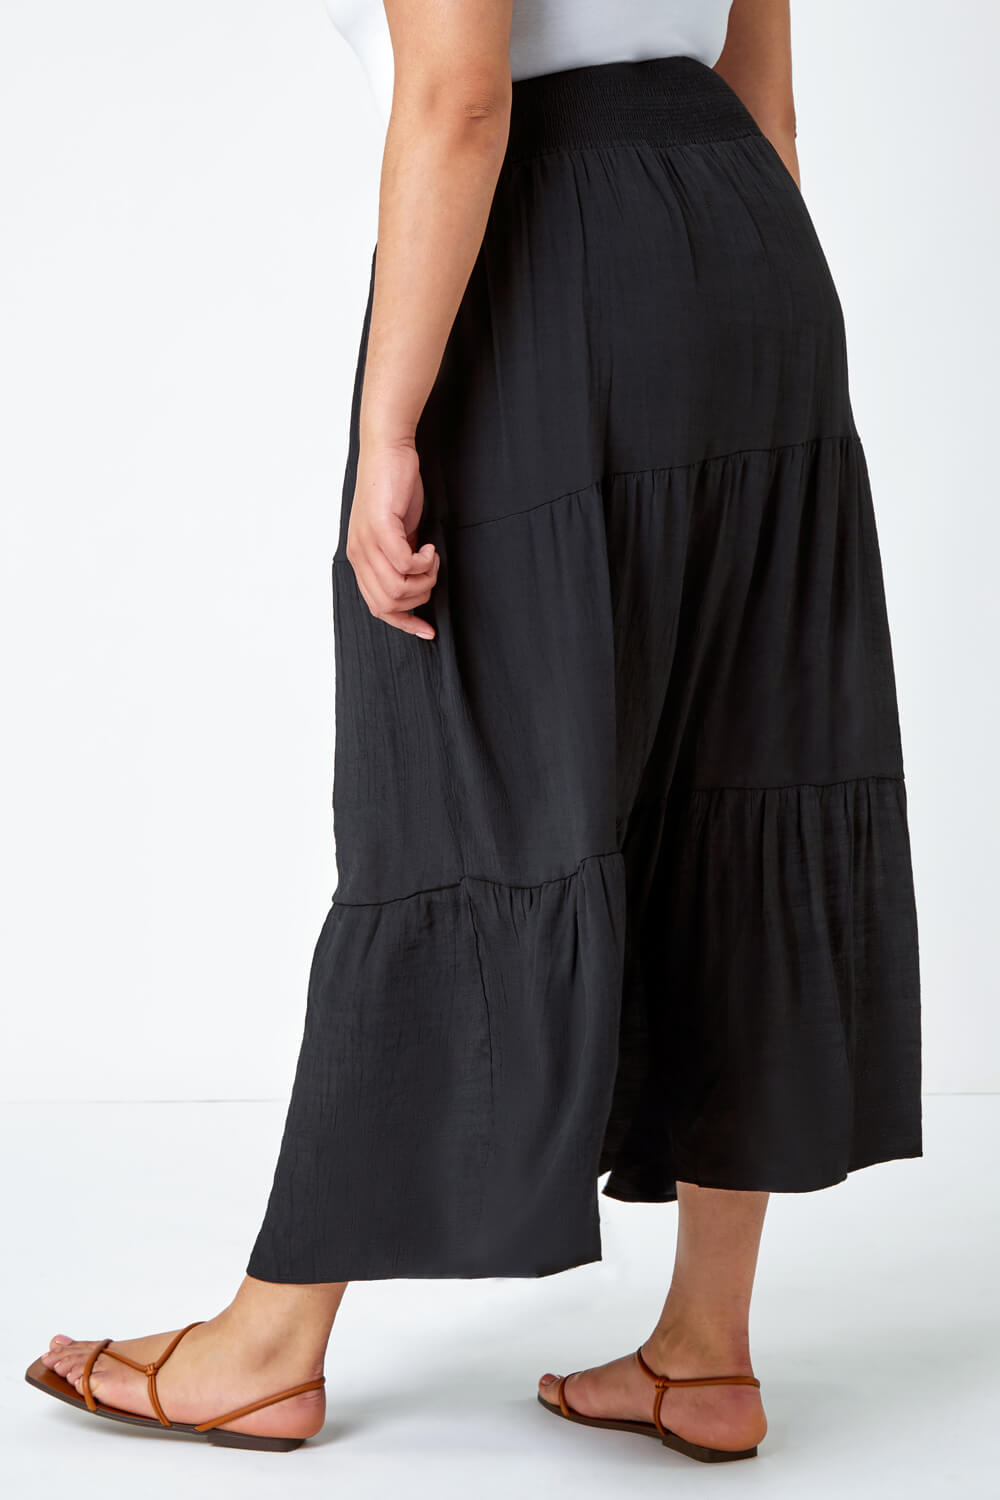 Black Curve Stretch Waist Tiered Maxi Skirt, Image 3 of 5